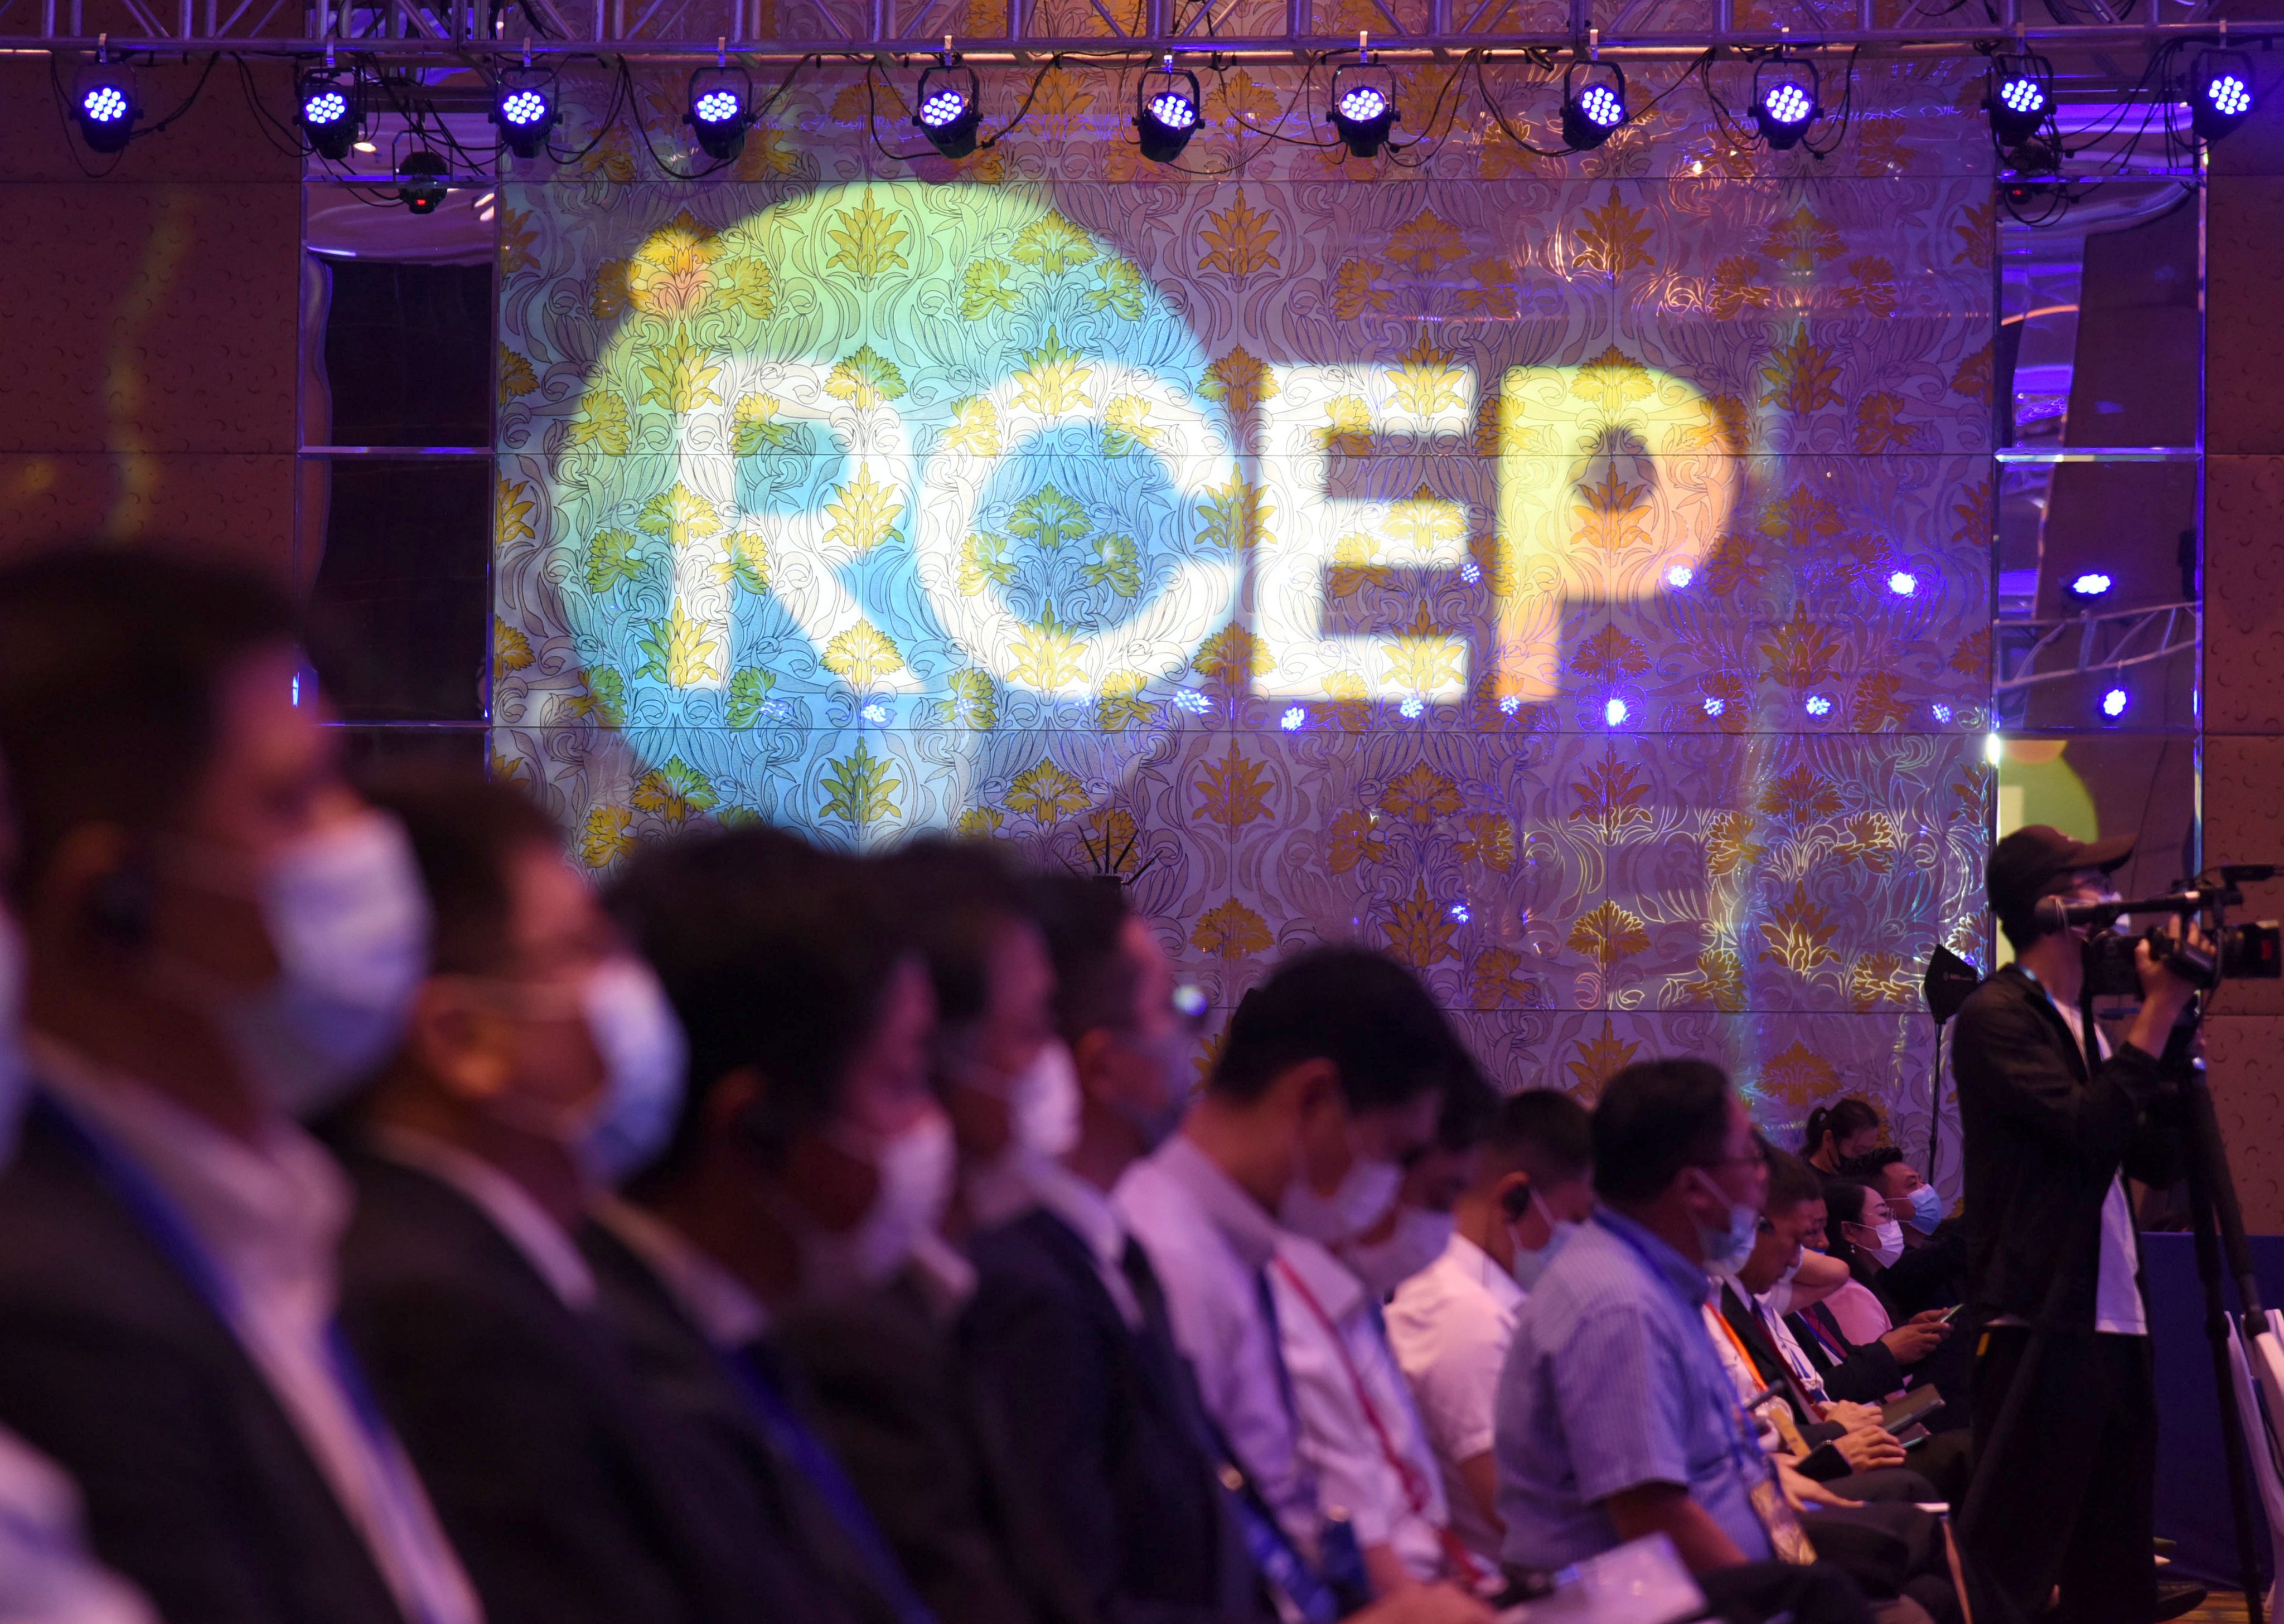 A Regional Comprehensive Economic Partnership (RCEP) forum on trade cooperation is held in Qingdao, China, on July 28. Hong Kong has applied to join the RCEP, which includes both China and all 10 Asean nations. Photo: Xinhua